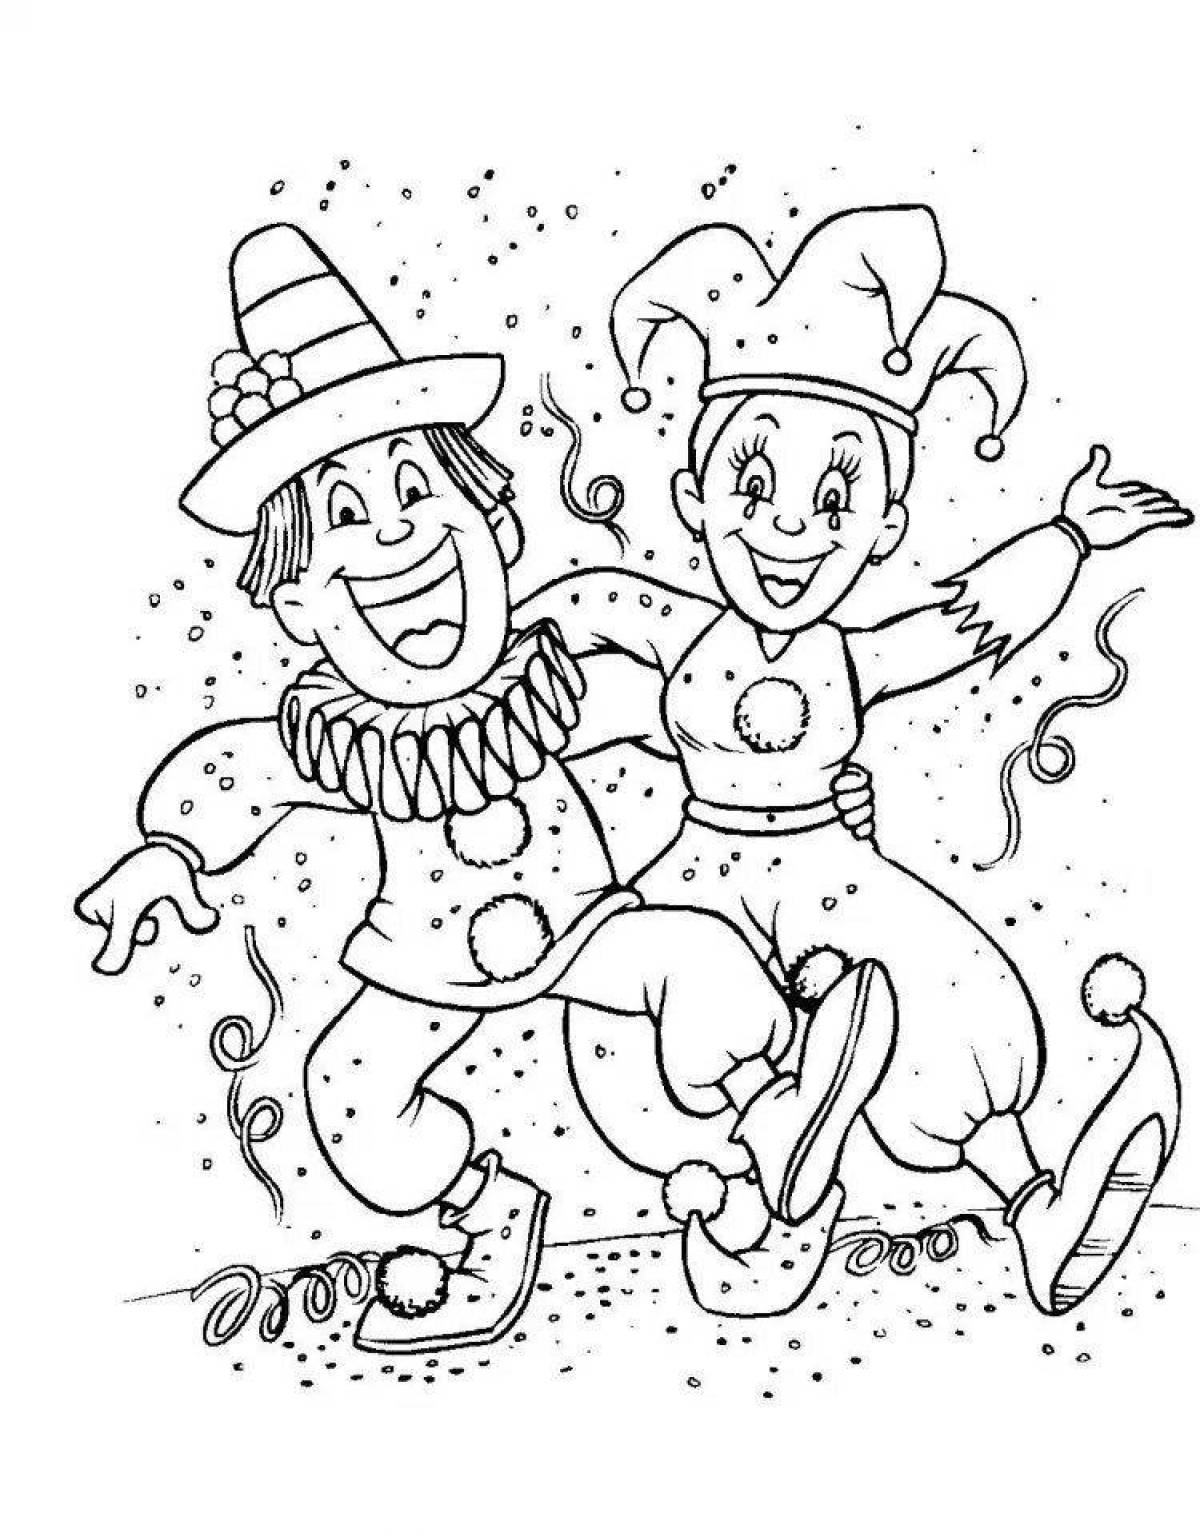 Colouring jester coloring page